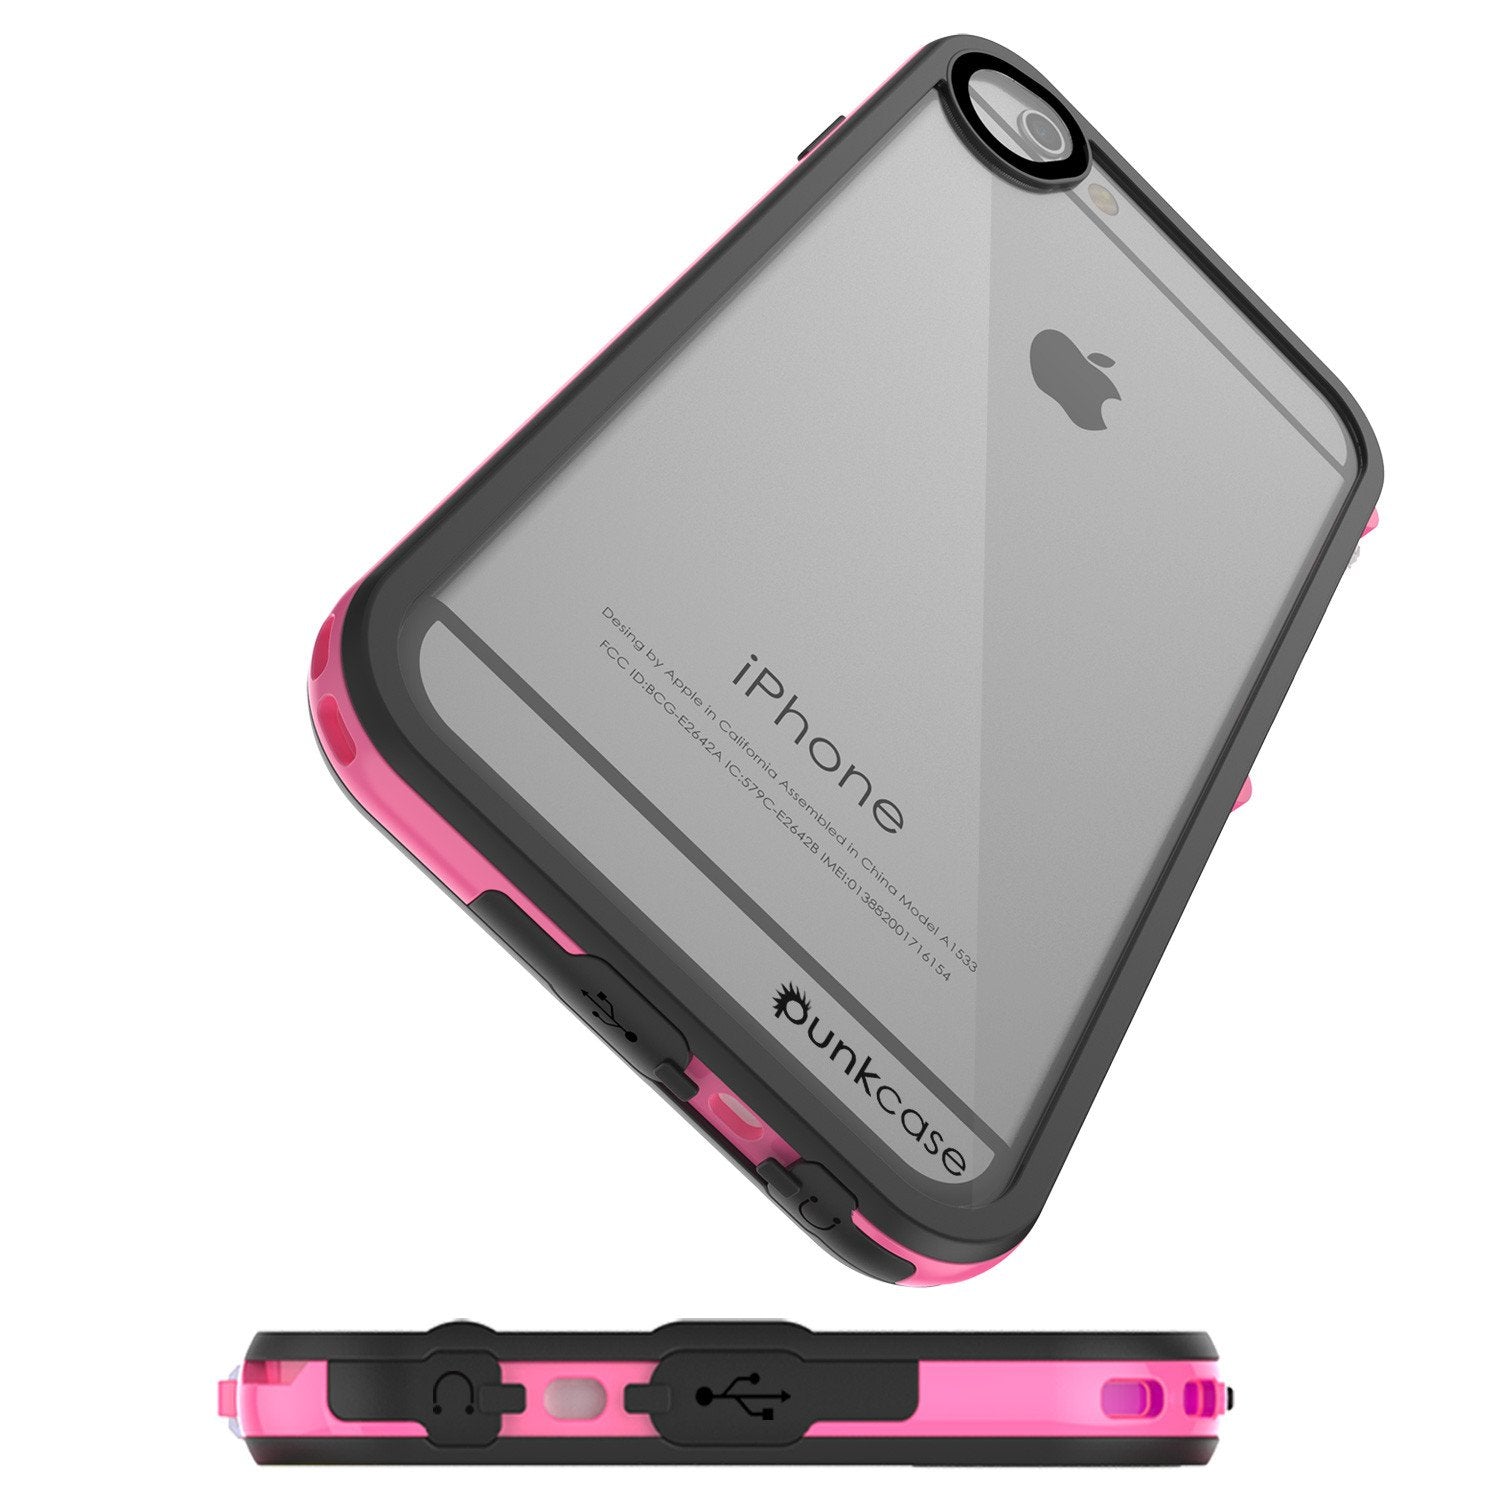 Apple iPhone 7 Waterproof Case, PUNKcase CRYSTAL 2.0 Pink W/ Attached Screen Protector  | Warranty - PunkCase NZ